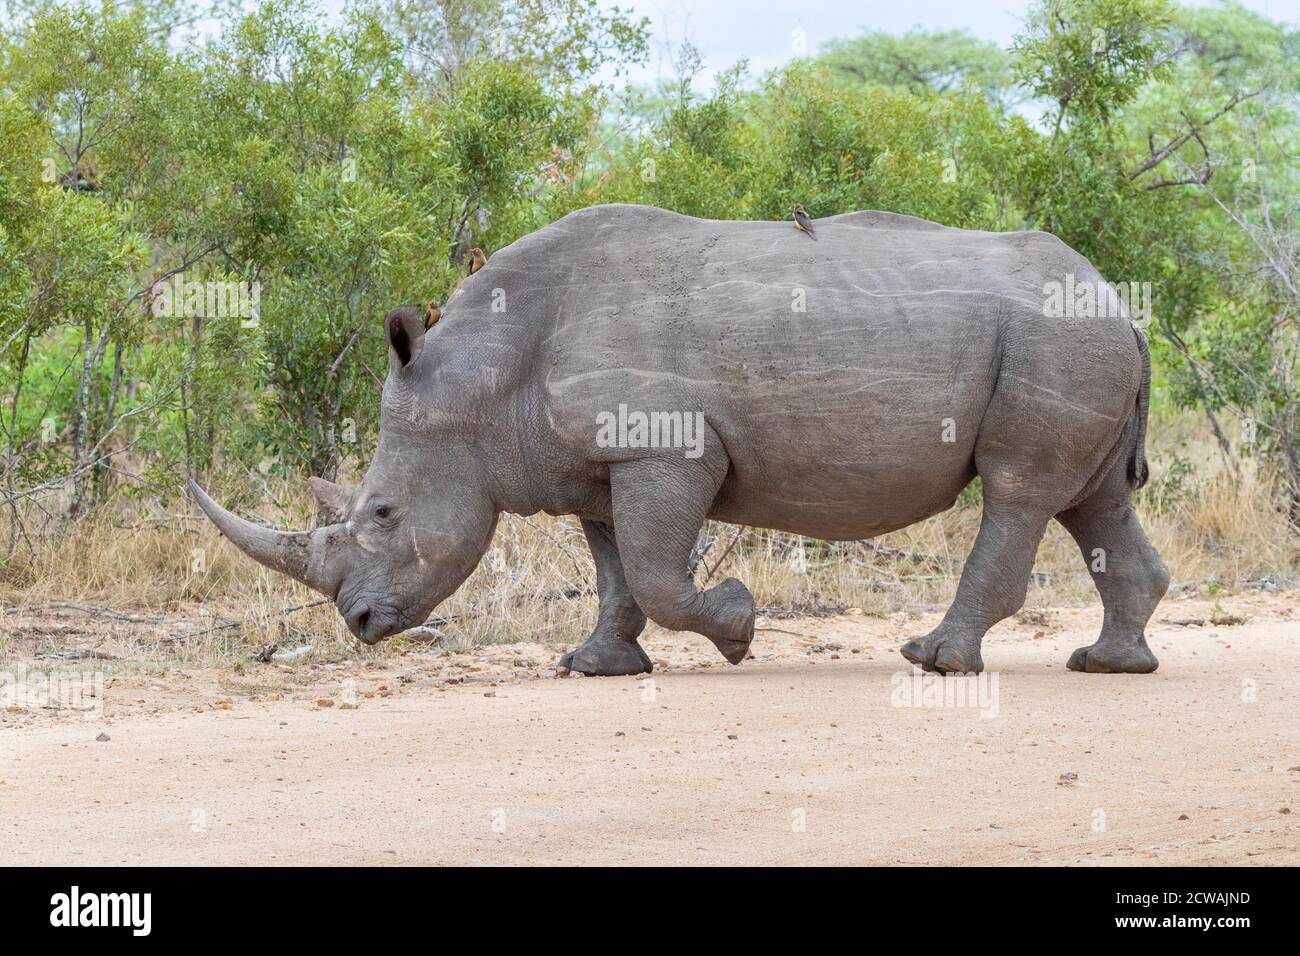 White Rhinoceros (Ceratotherium simum), side view of an adult male crossing a road, Mpumalanga, South Africa Stock Photo